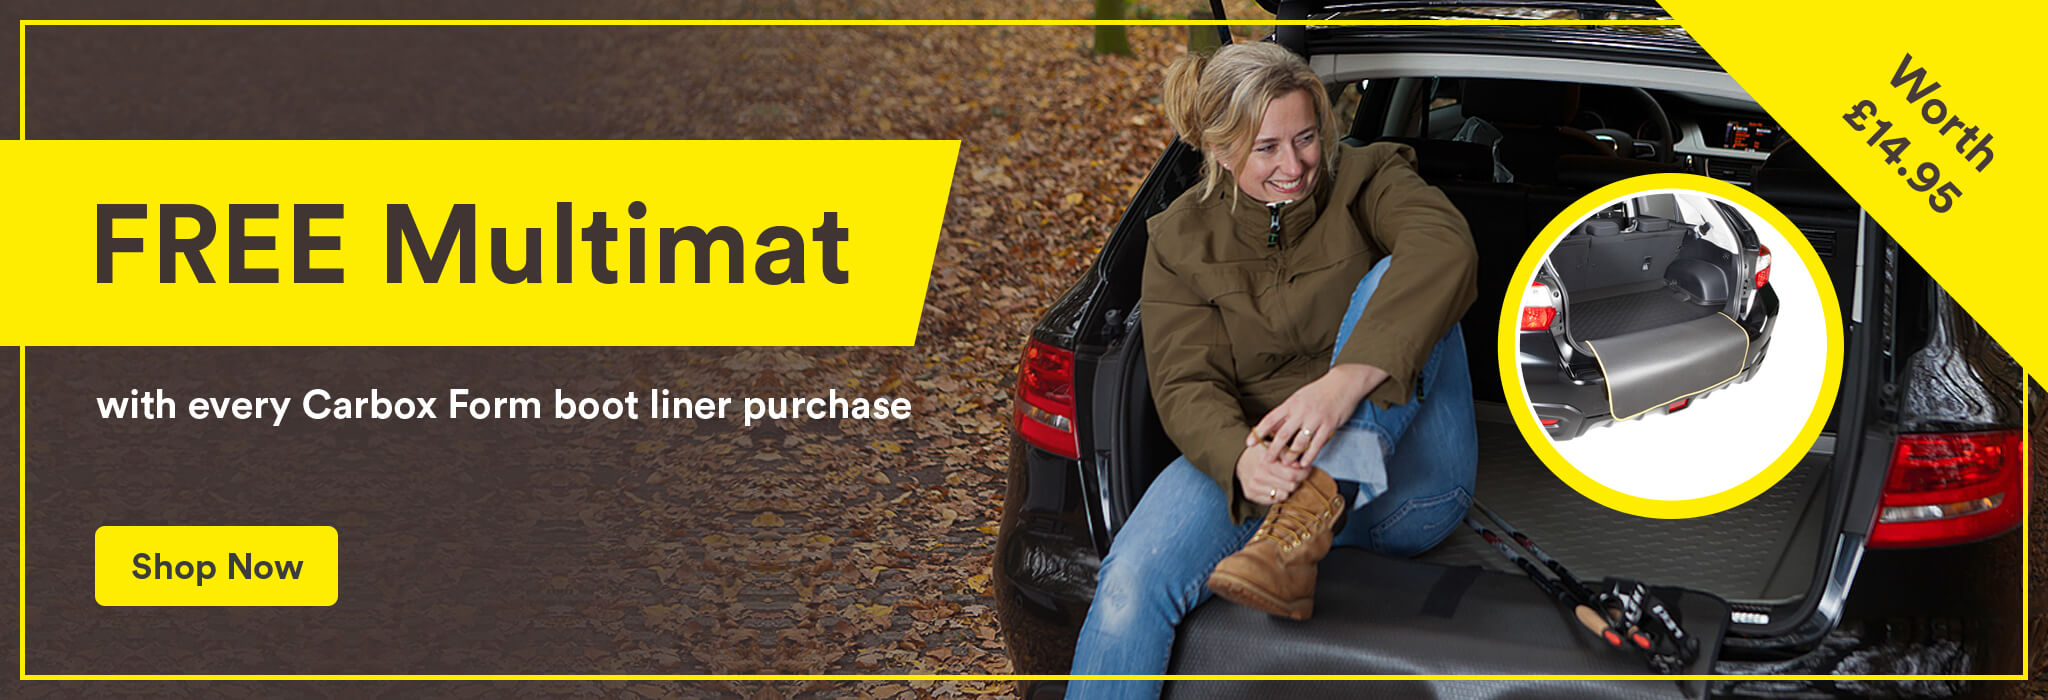 Free MultiMat bumper protector with every Carbox Form boot liner